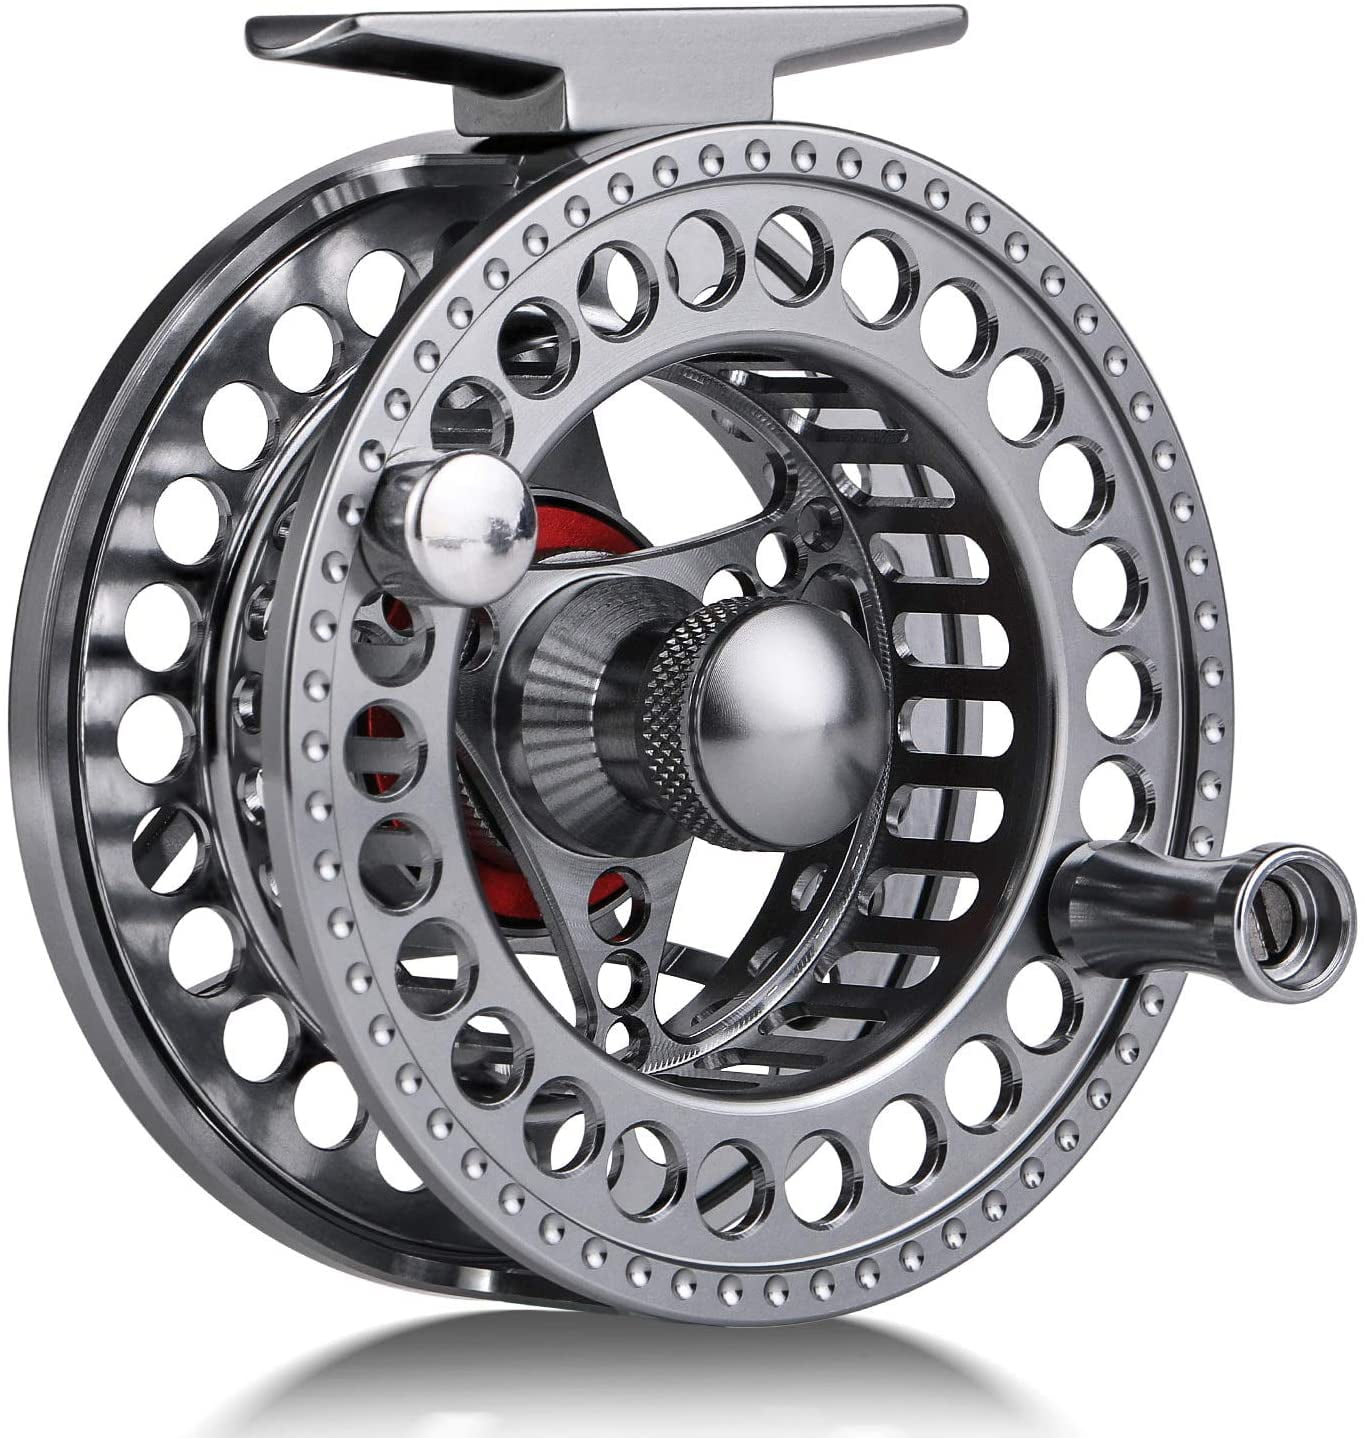 Cortland 5/6 wt Fly Reel with Disc Drag Fly Reel GREAT REEL FREE SHIPPING 